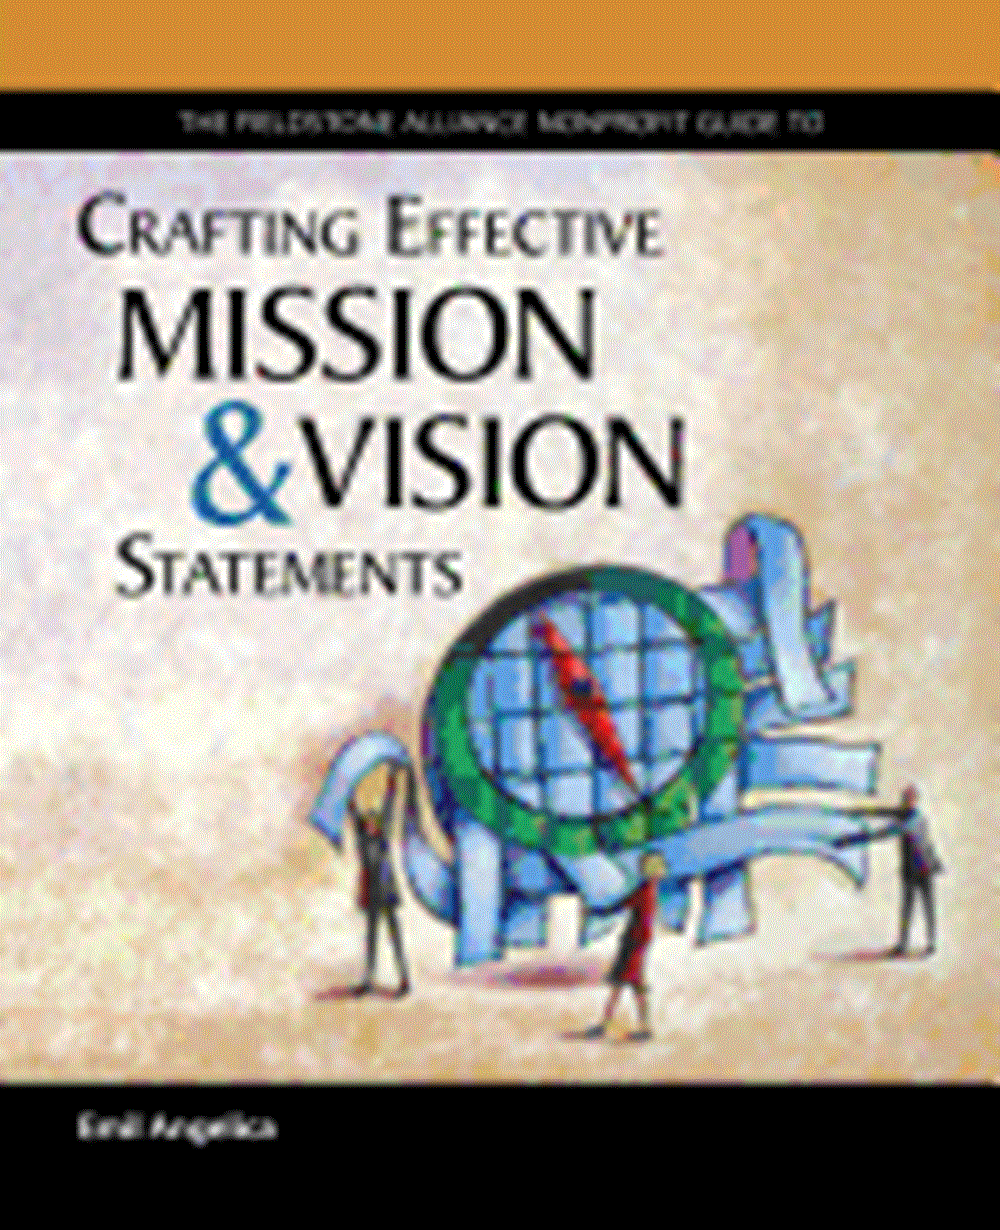 Crafting Effective Mission and Vision Statements